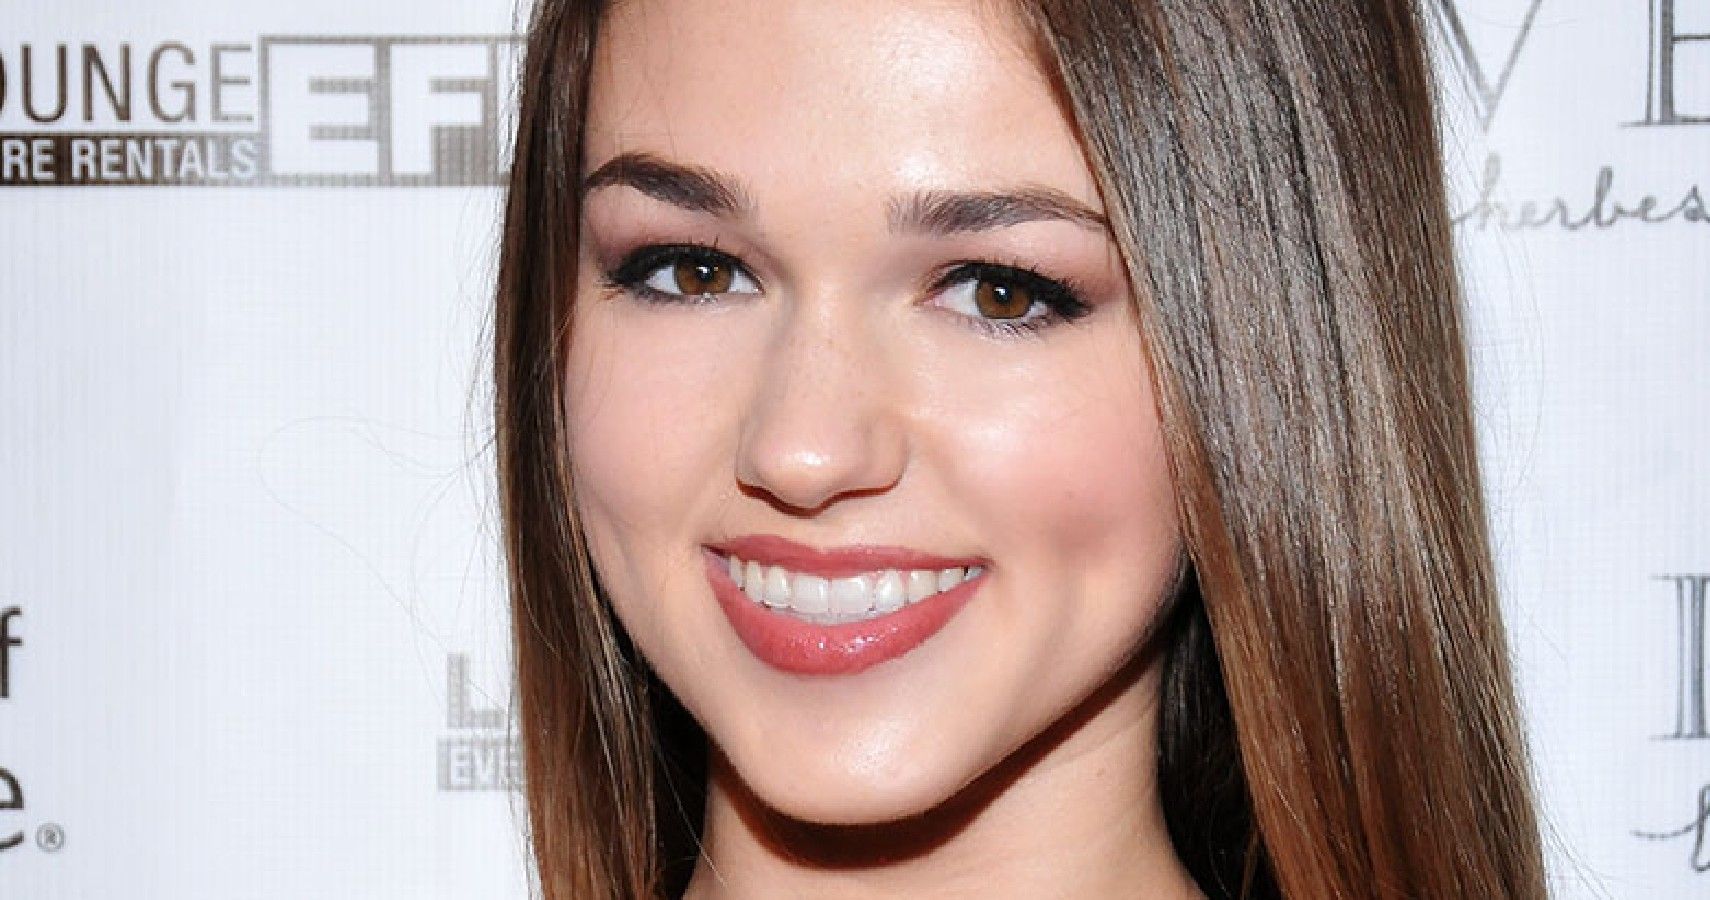 Sadie Robertson Experienced Severe Postpartum Anxiety After Daughter's Birth: It Felt 